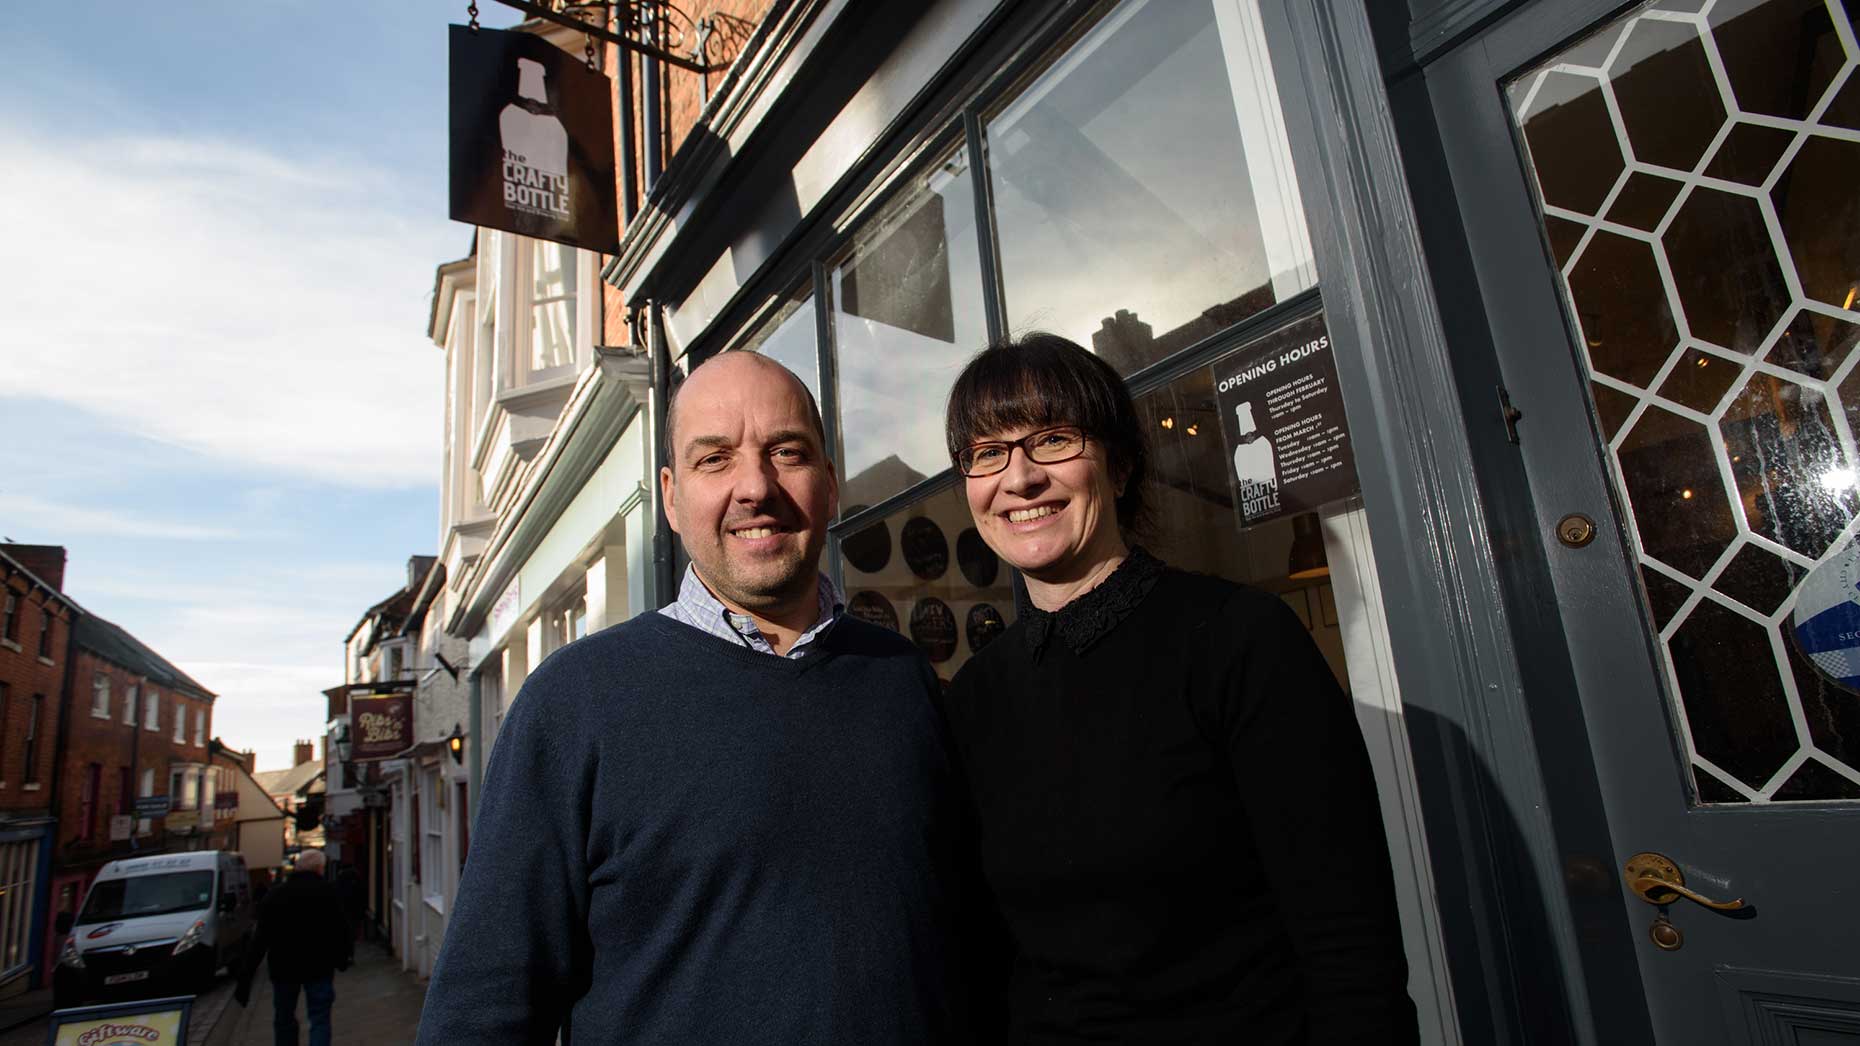 Business owners Karl and Claire. Photo: Steve Smailes for The Lincolnite